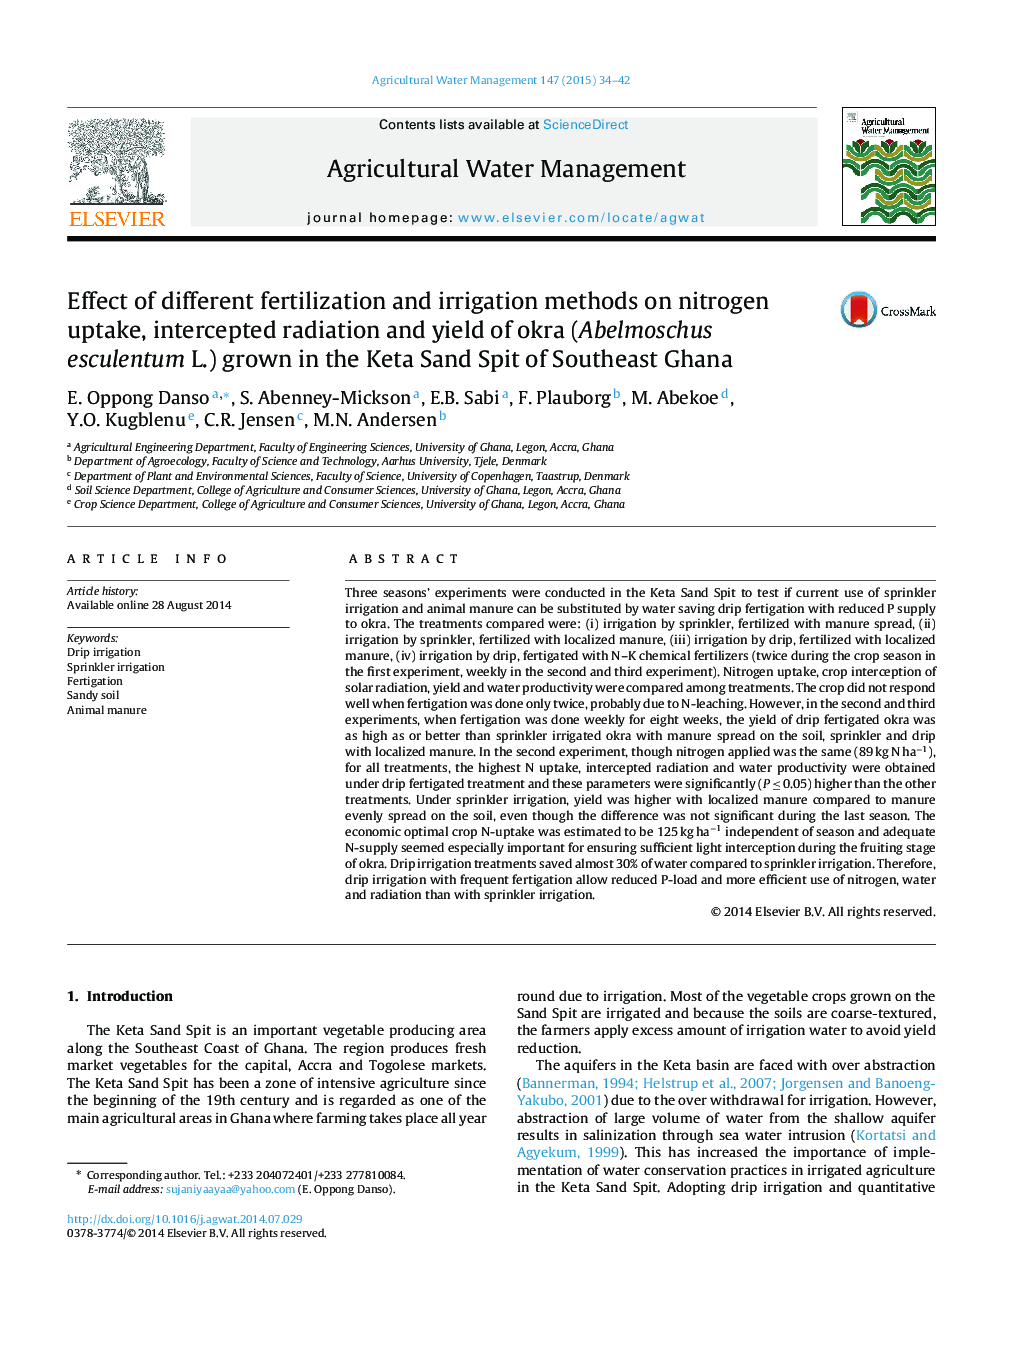 Effect of different fertilization and irrigation methods on nitrogen uptake, intercepted radiation and yield of okra (Abelmoschus esculentum L.) grown in the Keta Sand Spit of Southeast Ghana